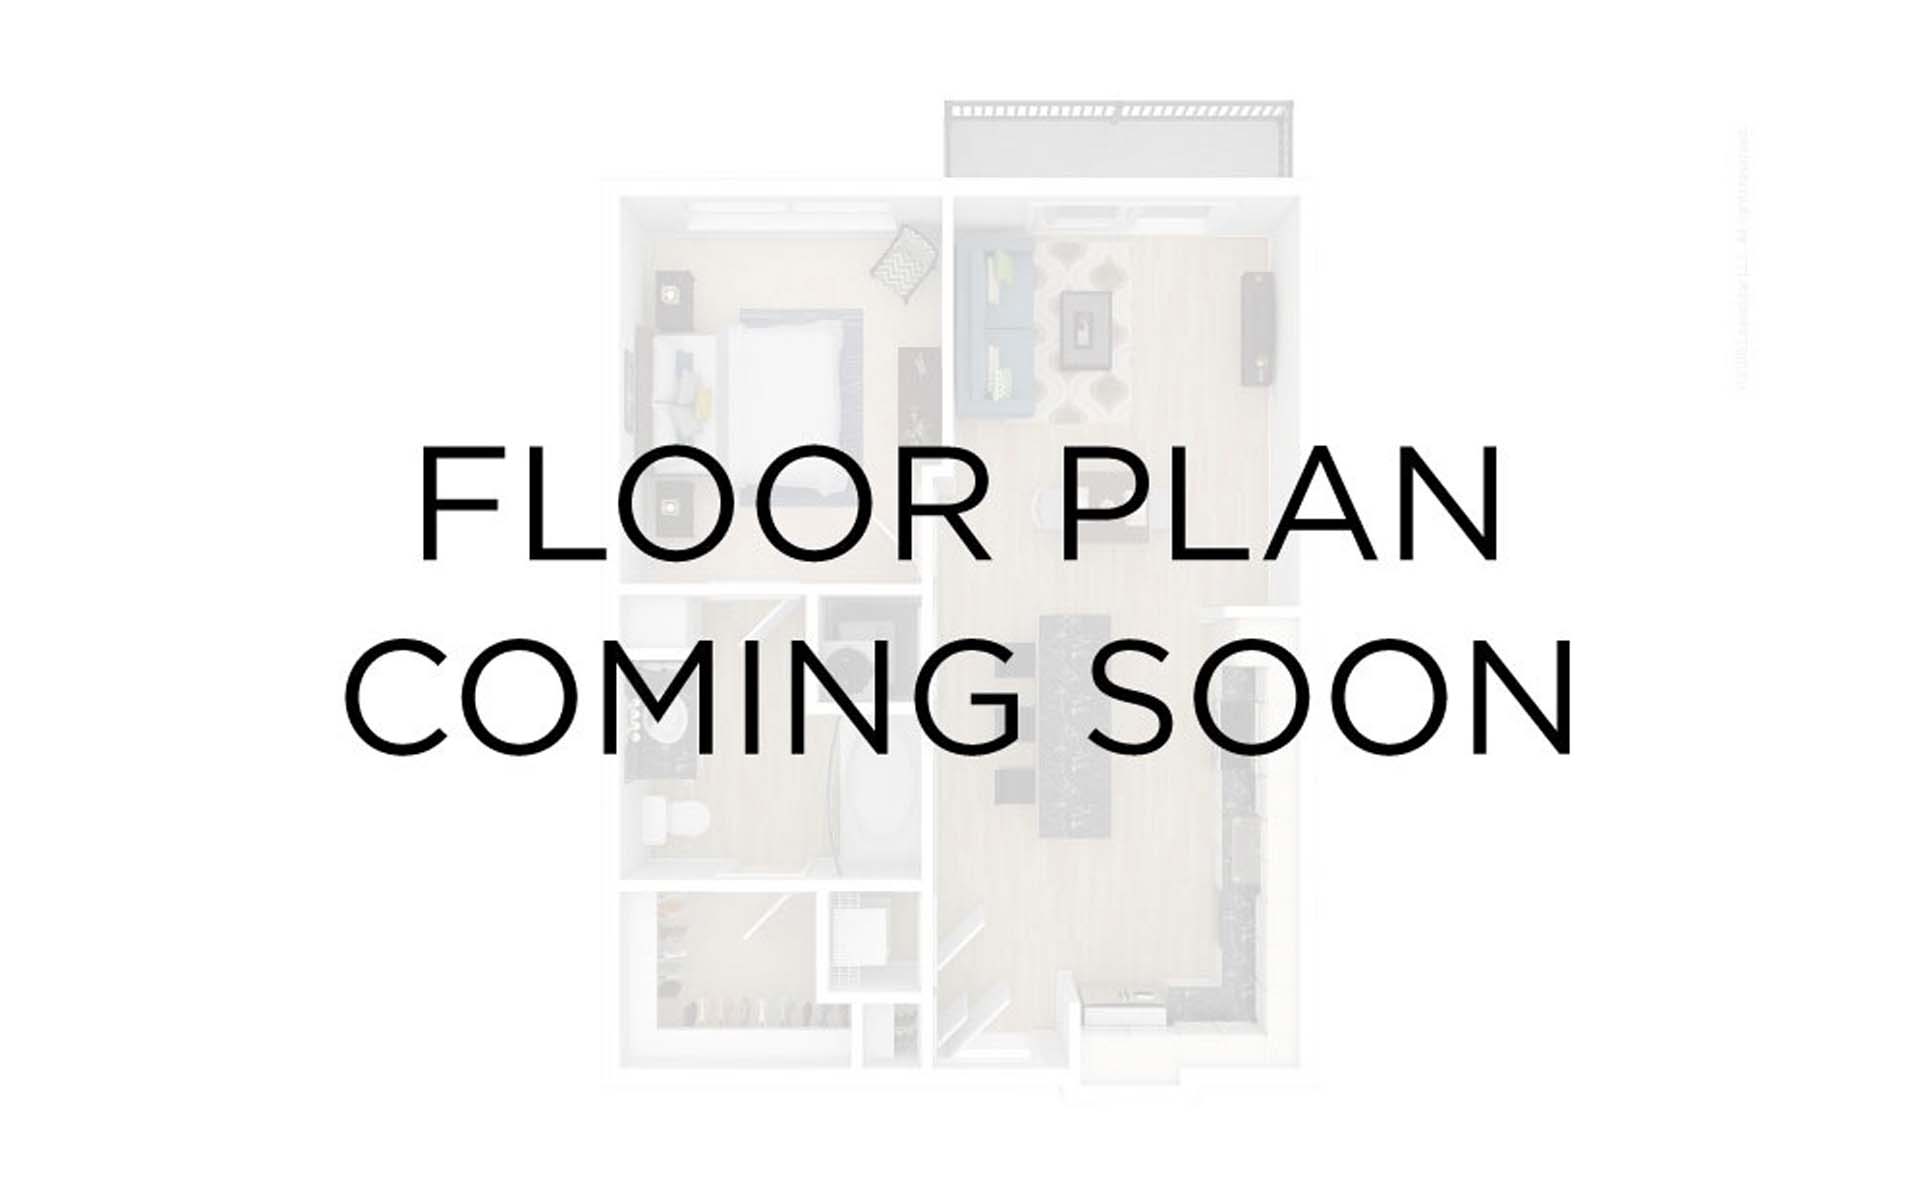 "Floor Plan Coming Soon" Over A Rendered Apartment